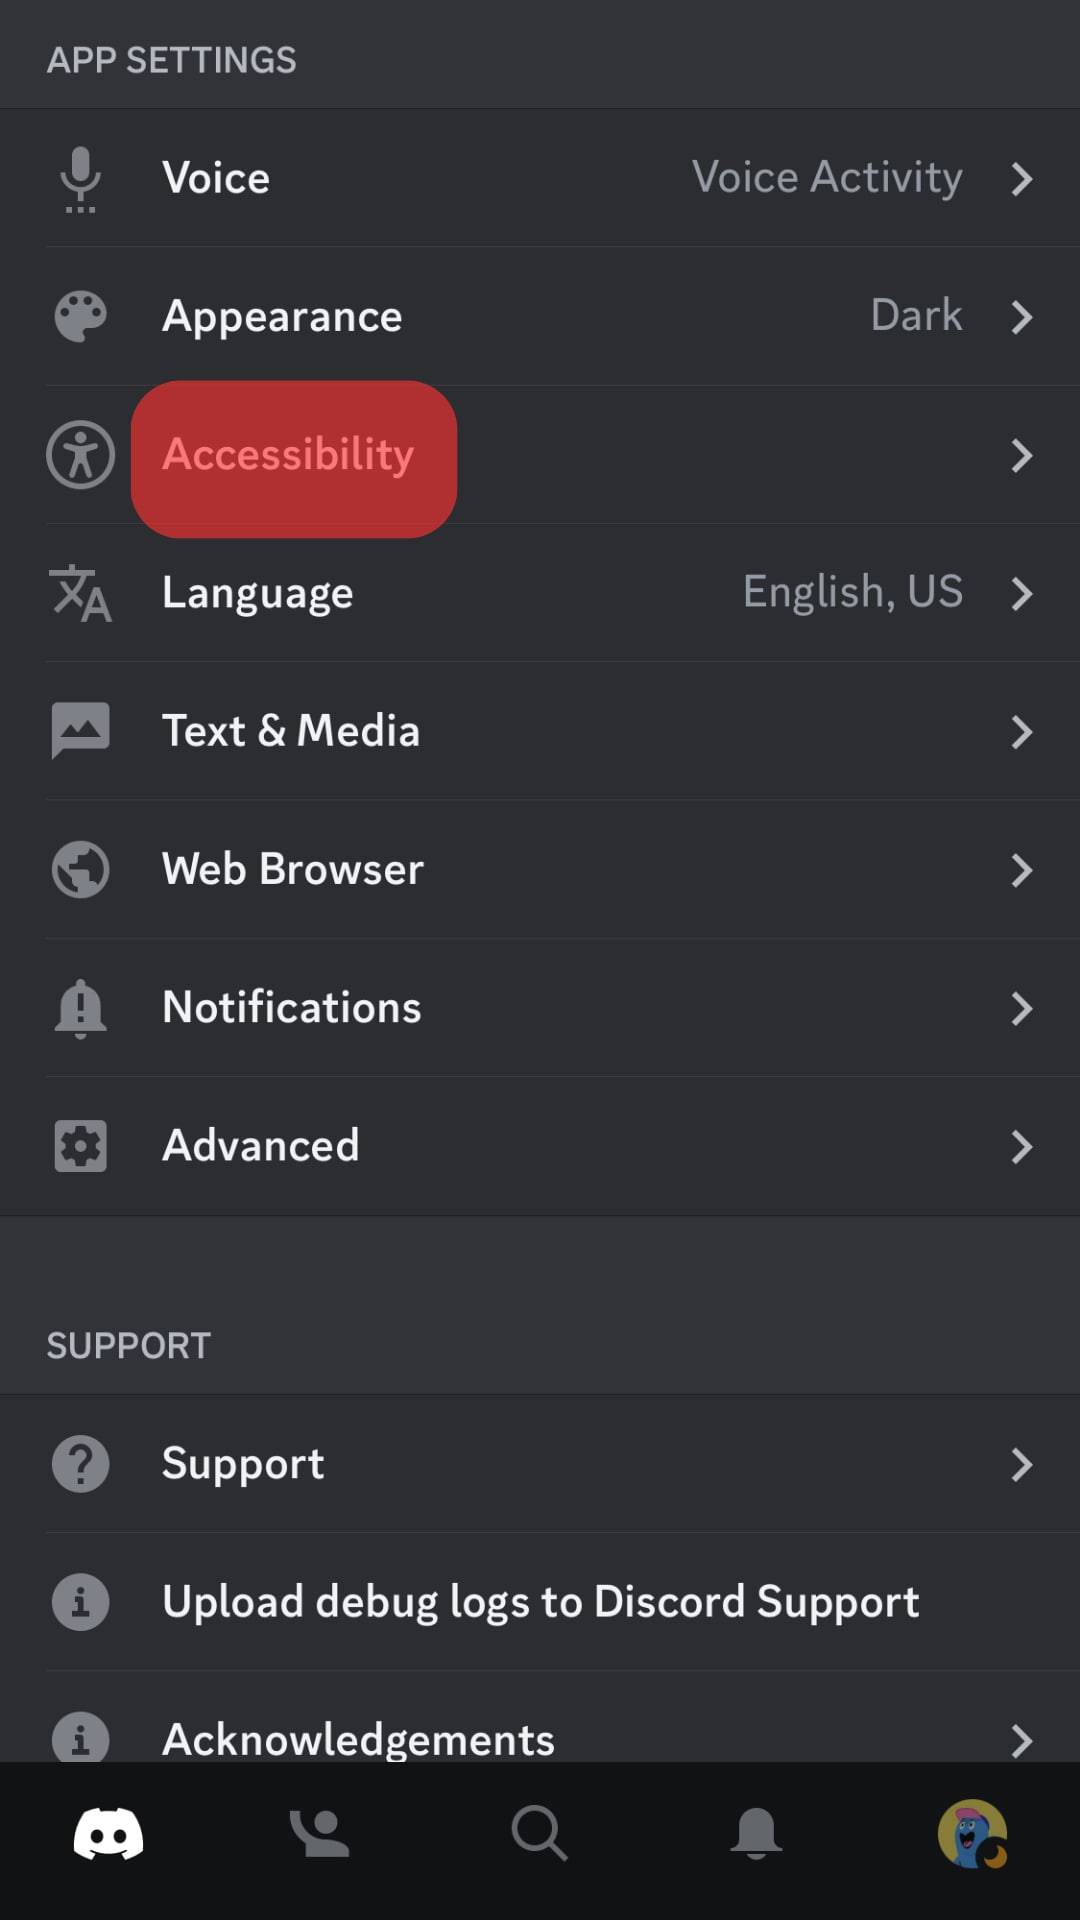 Tap On Accessibility.